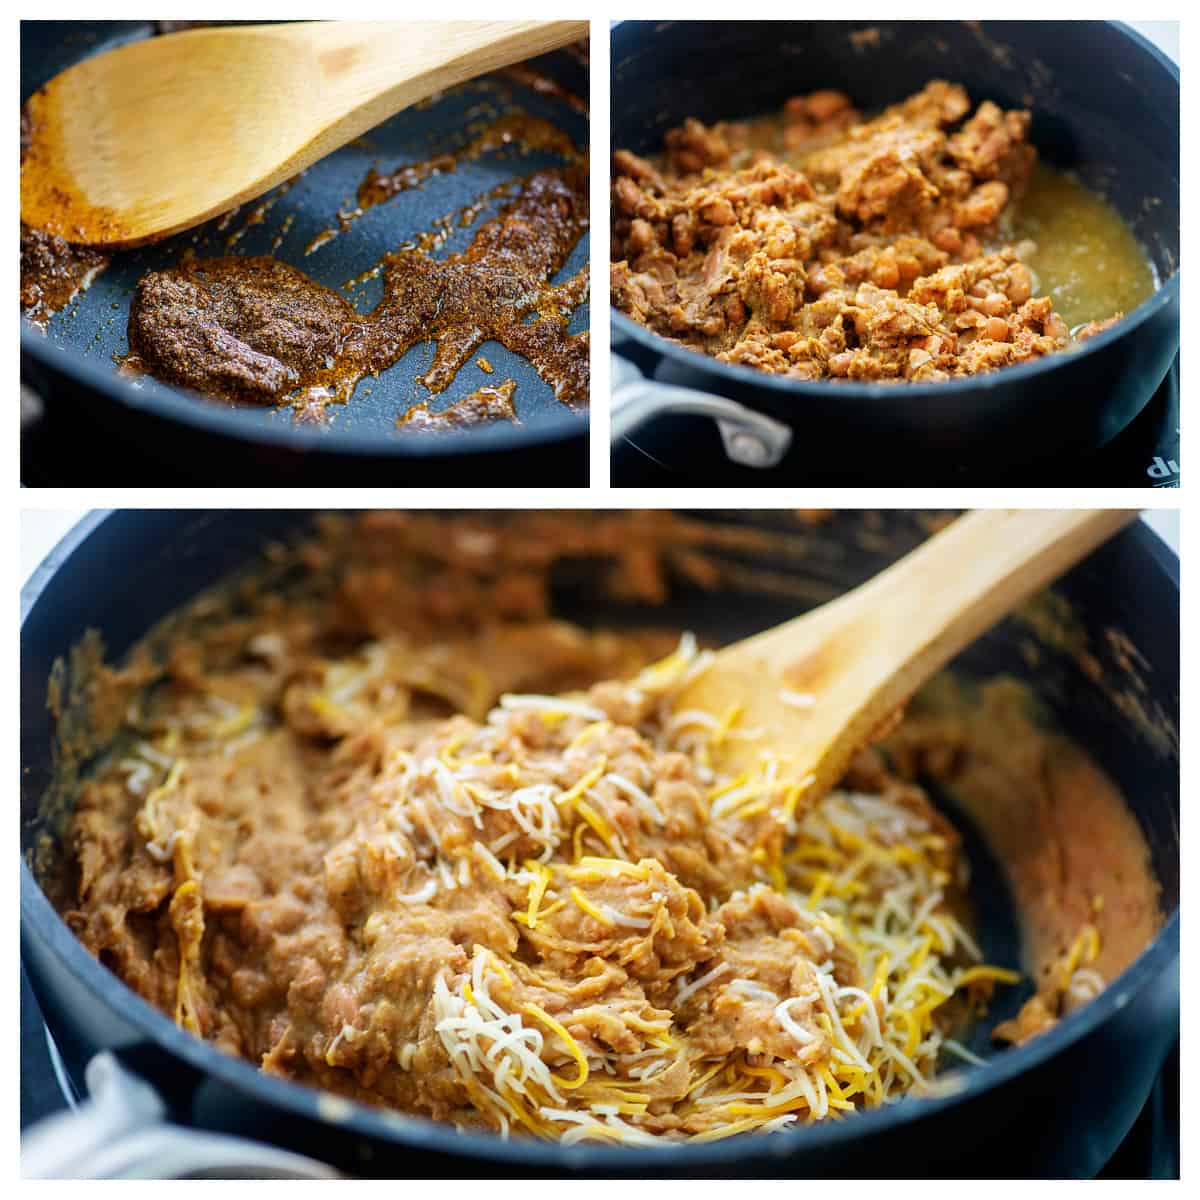 Collage showing how to make refried beans.